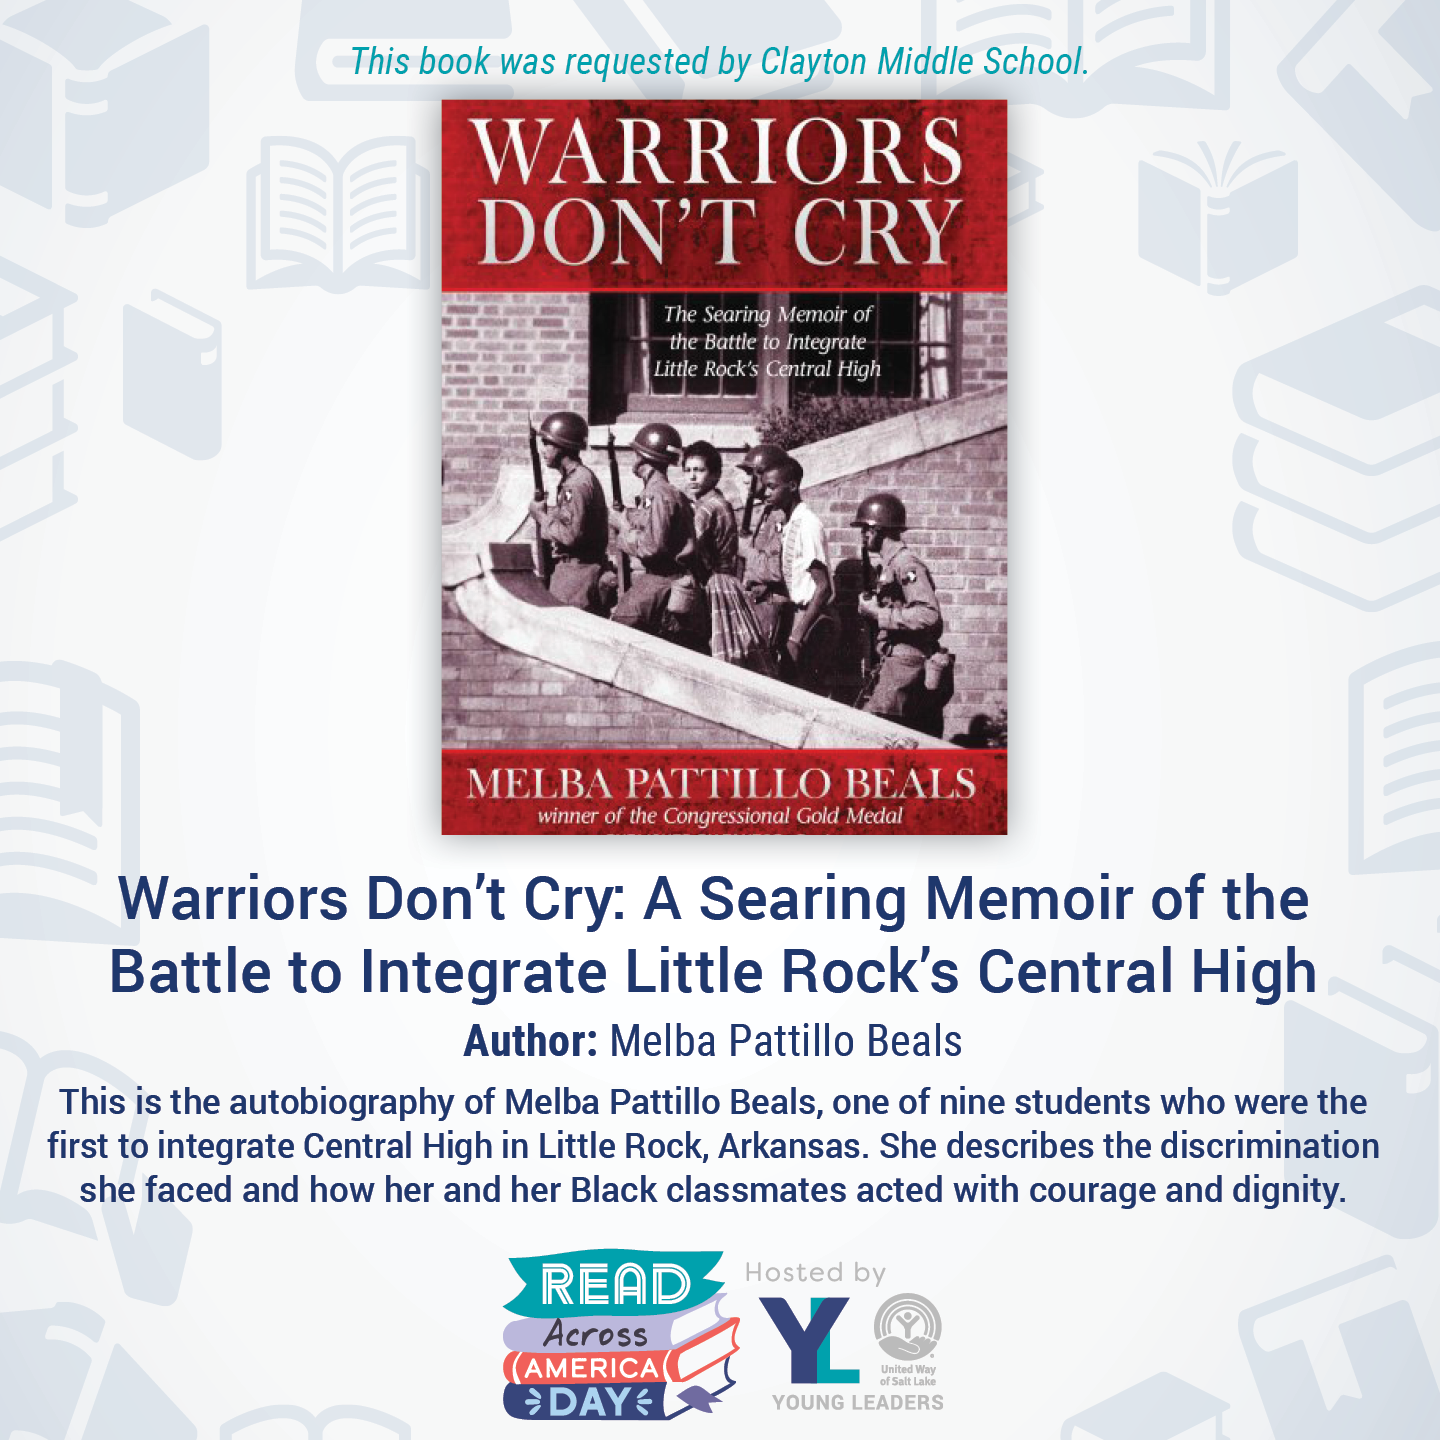 Warriors Don't Cry book cover and description